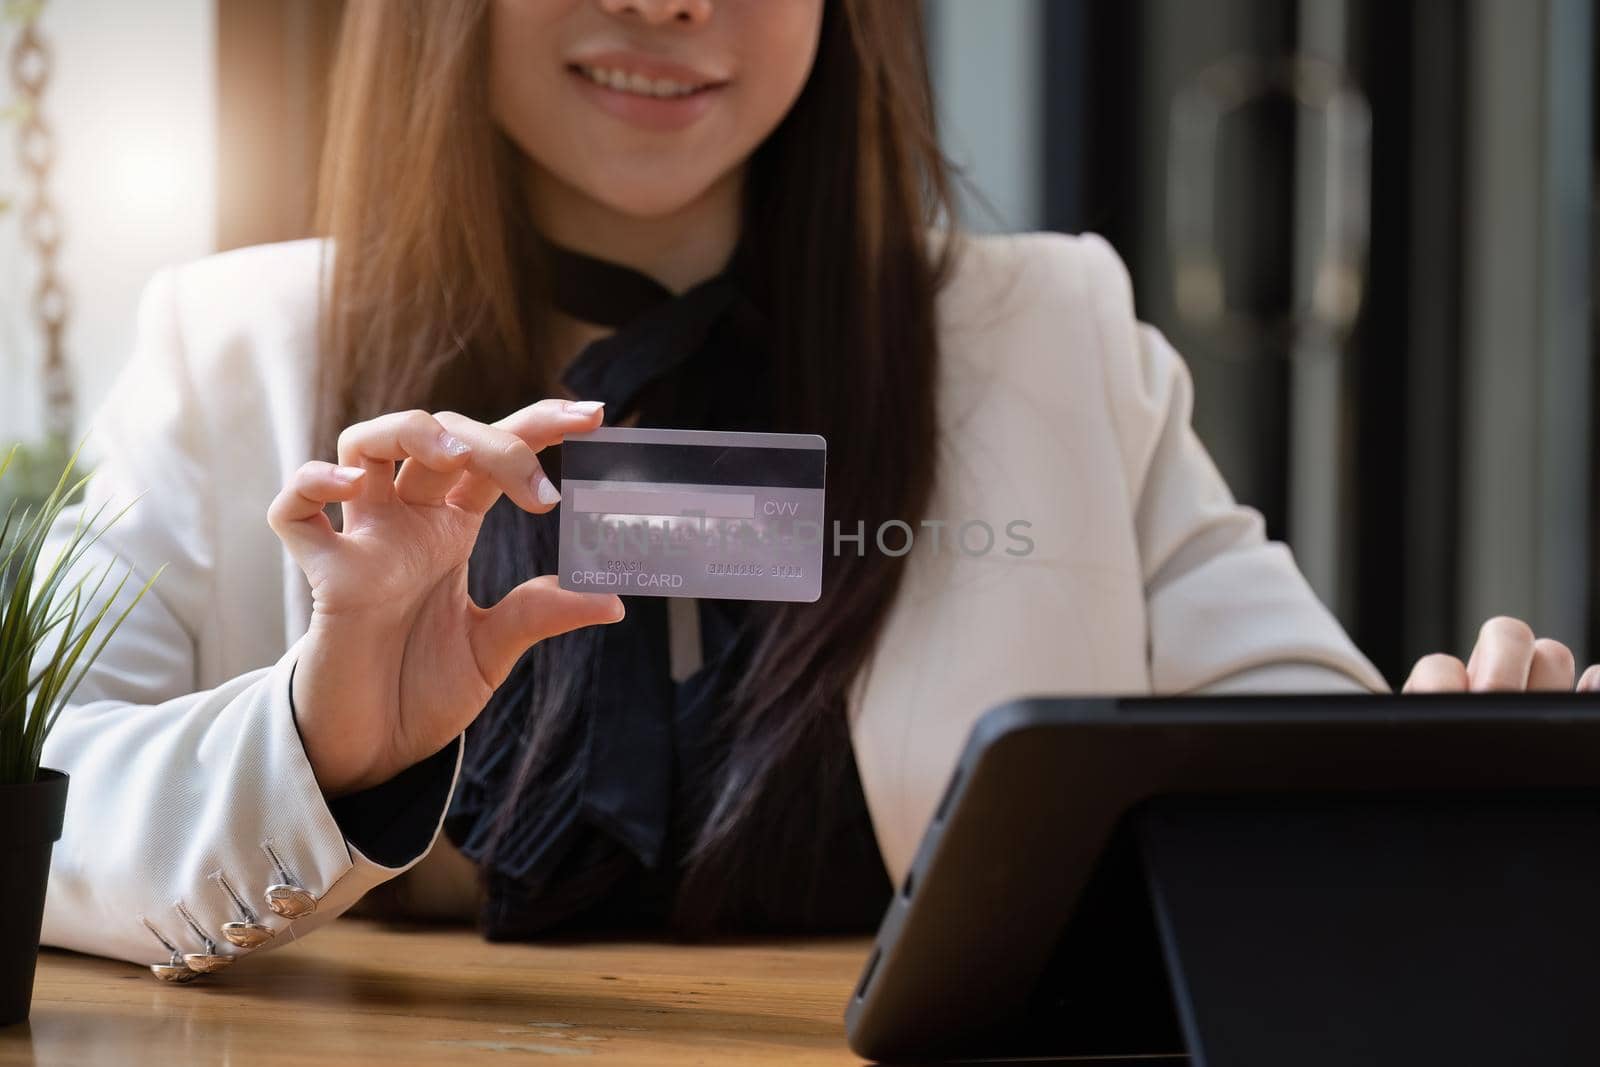 Asian young woman using a tablet and credit card for online shopping.